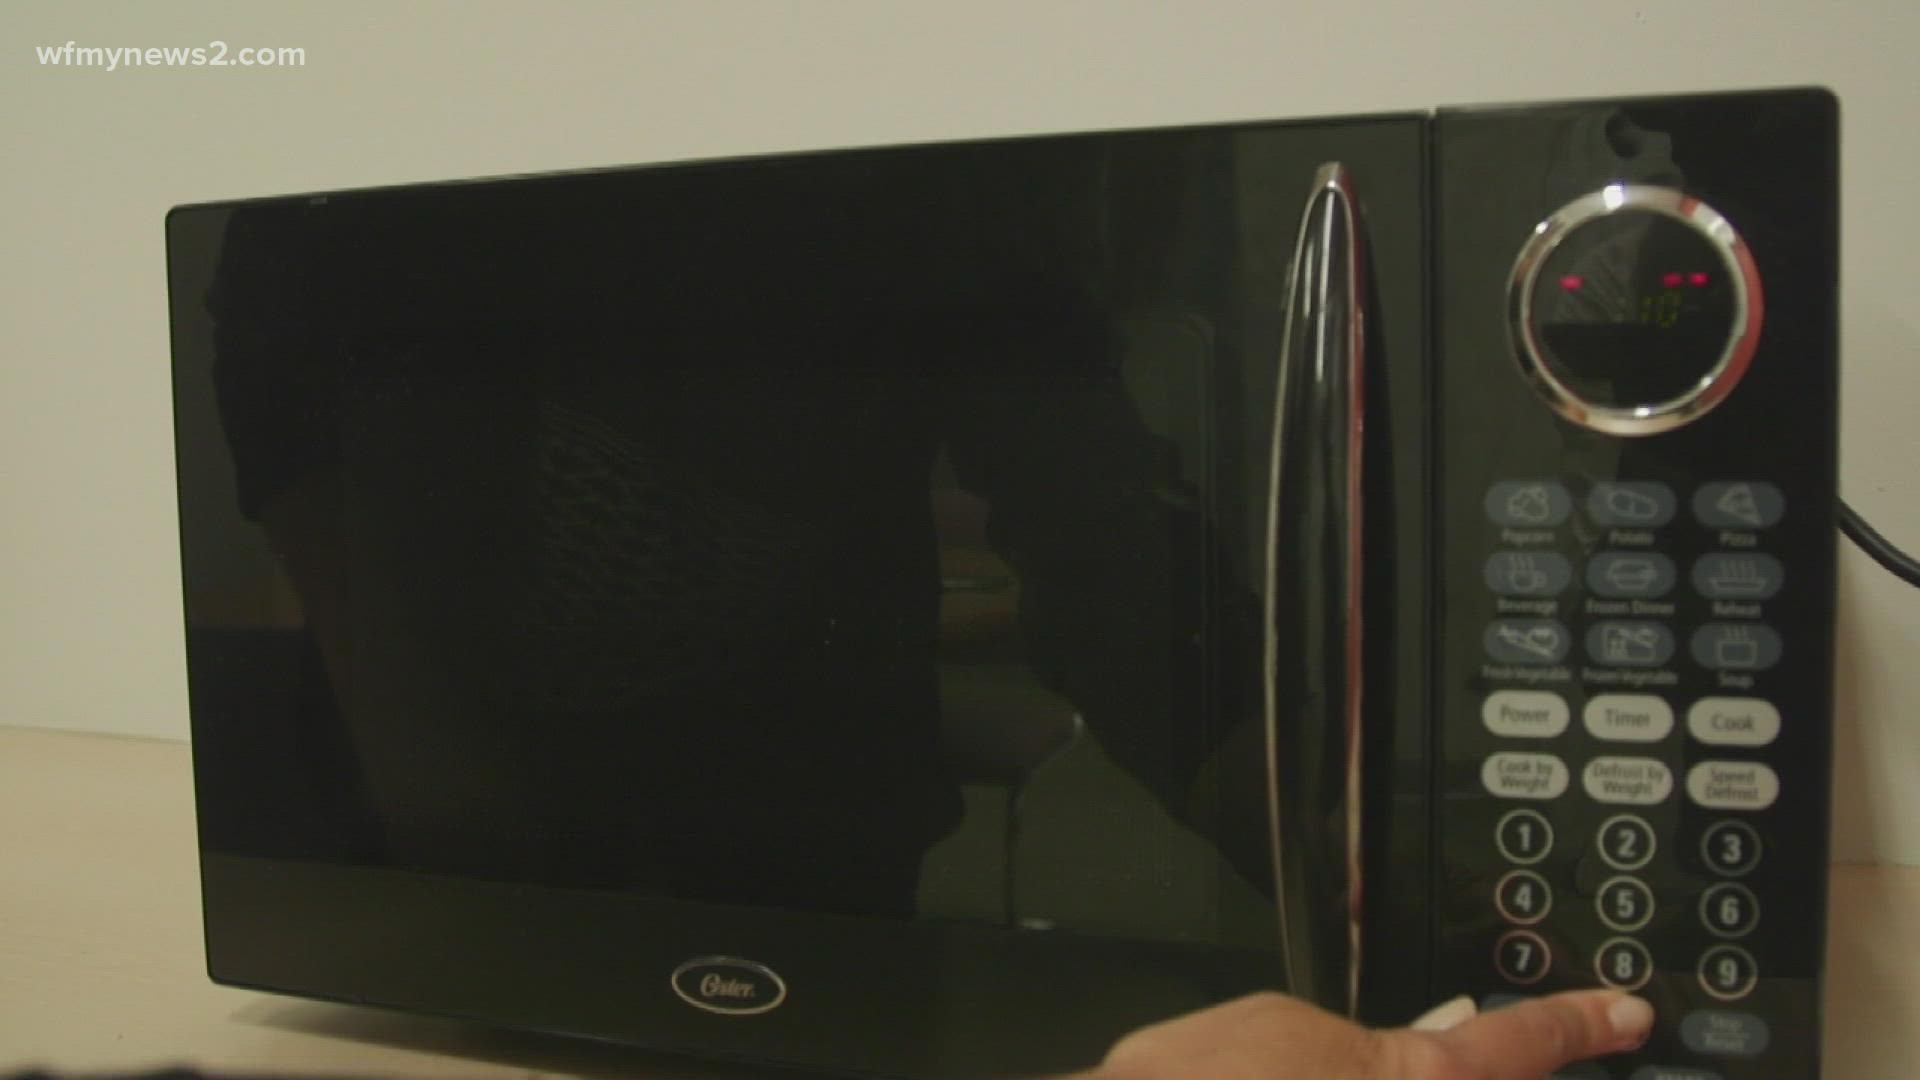 Consumer Reports put together ways to preserve your microwave to save you money.